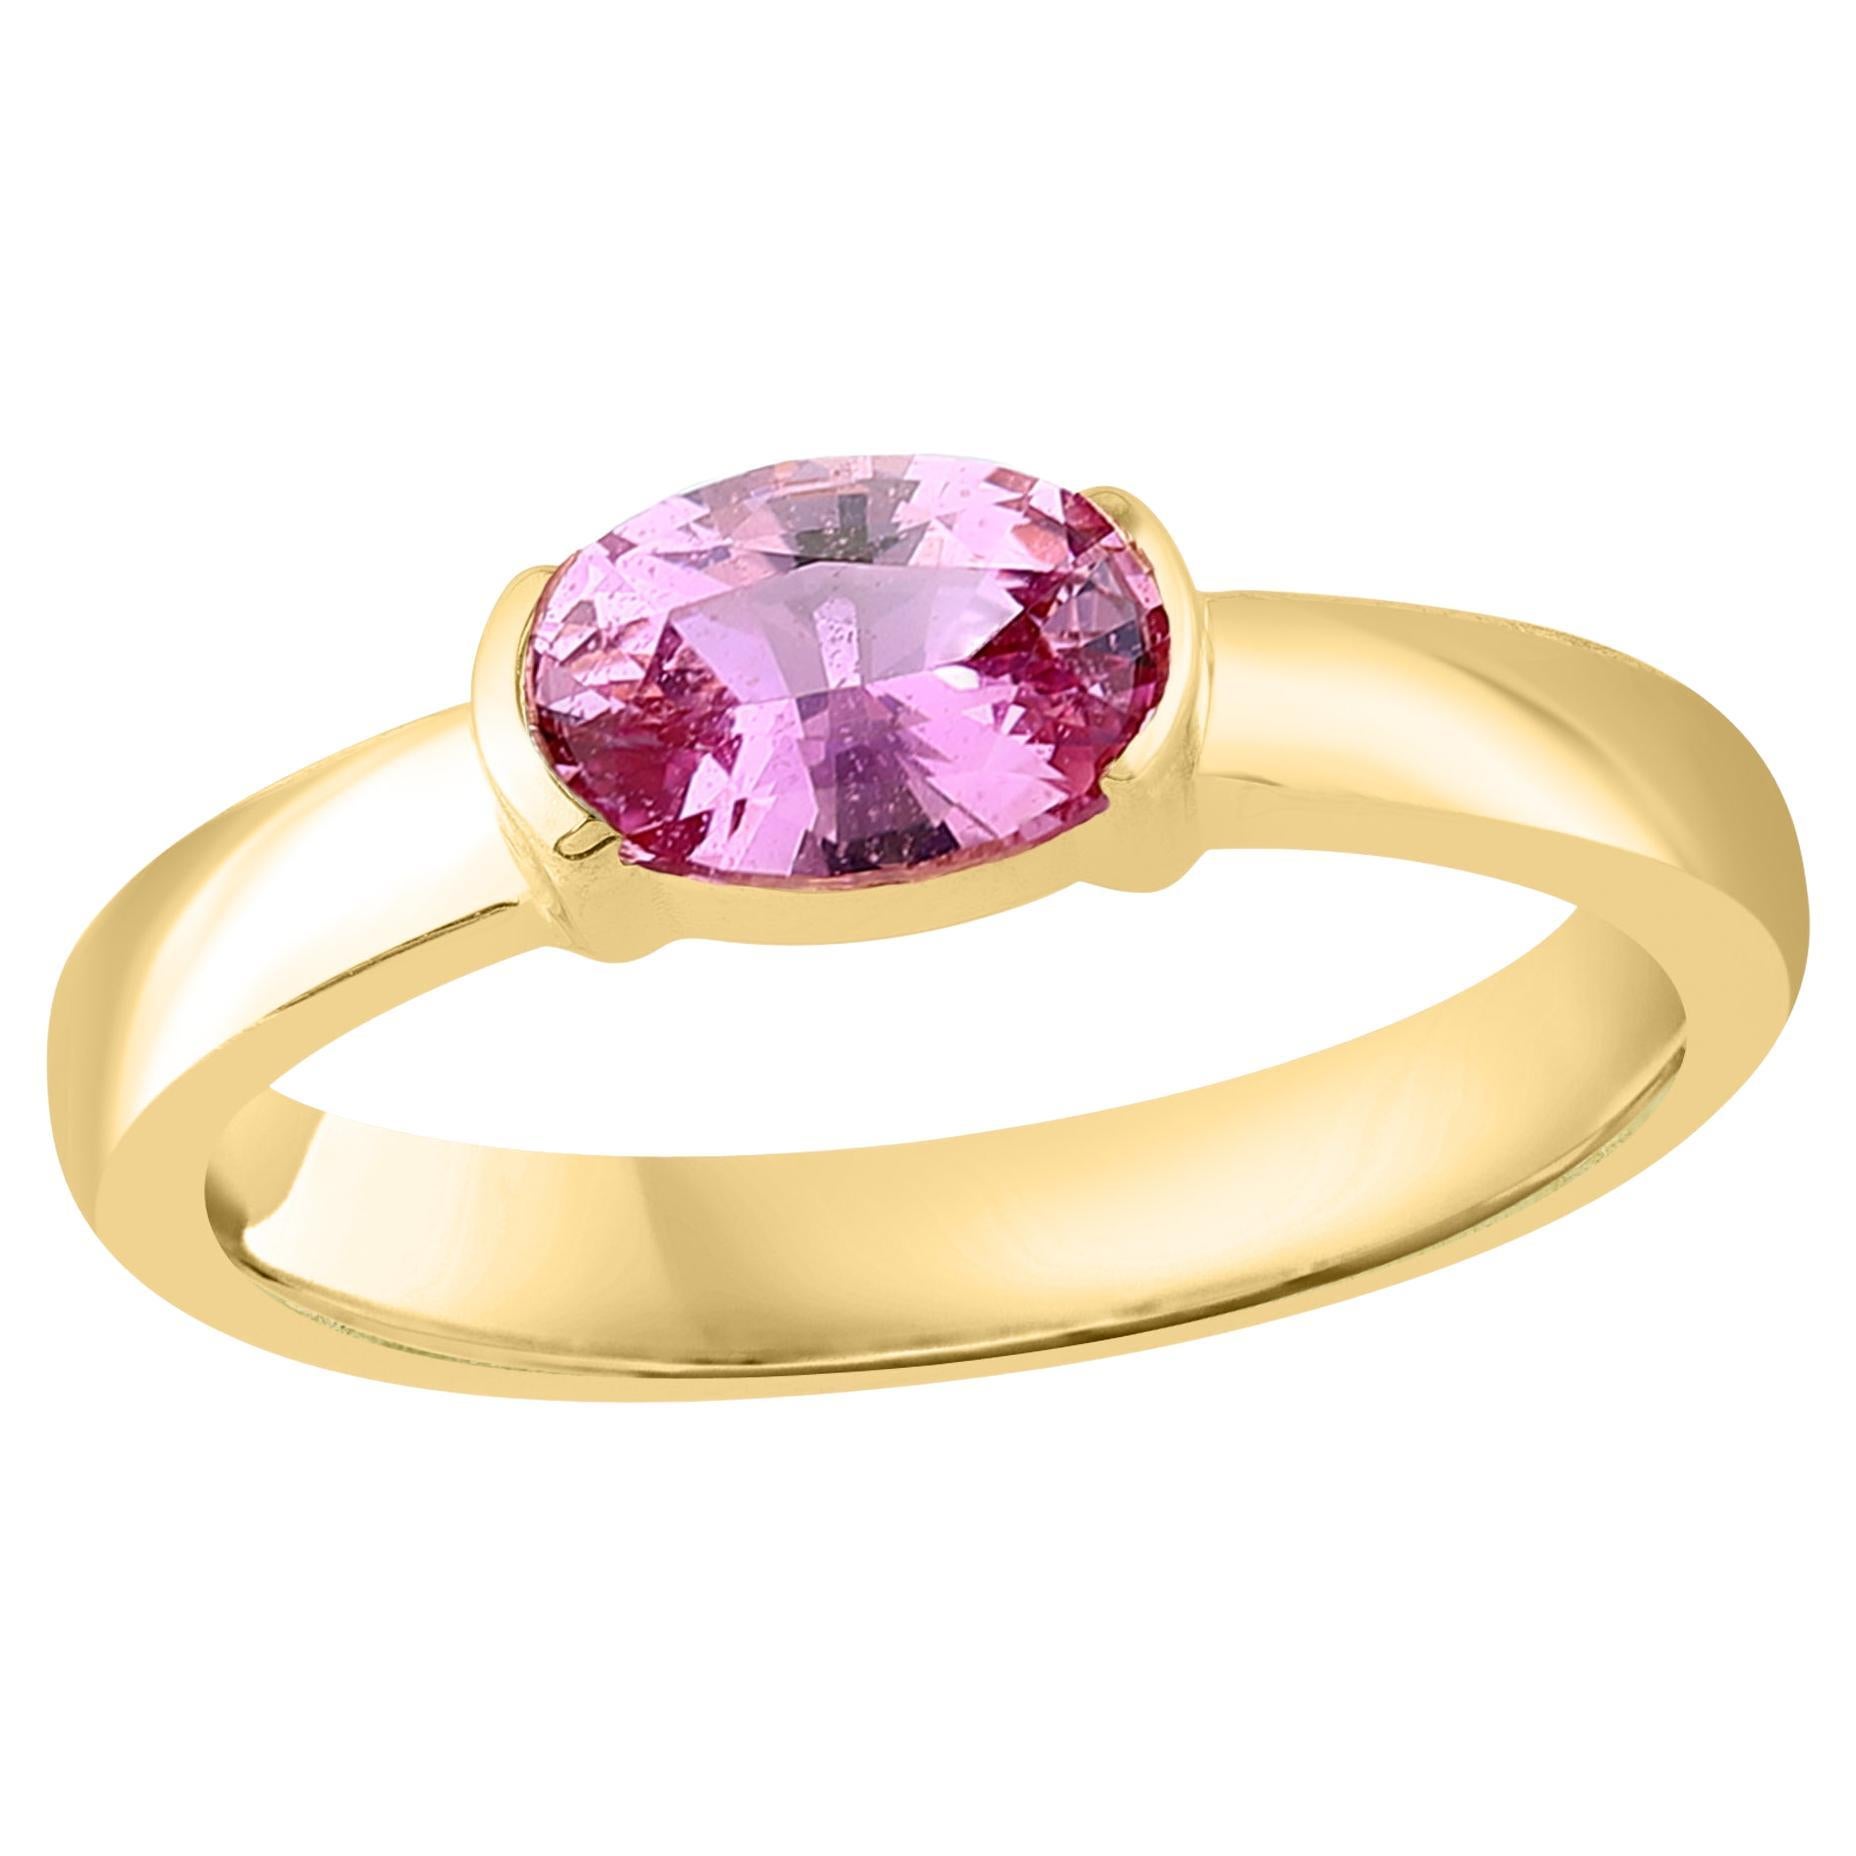 0.73 Carat Oval Cut Pink Sapphire Band Ring in 14K Yellow Gold